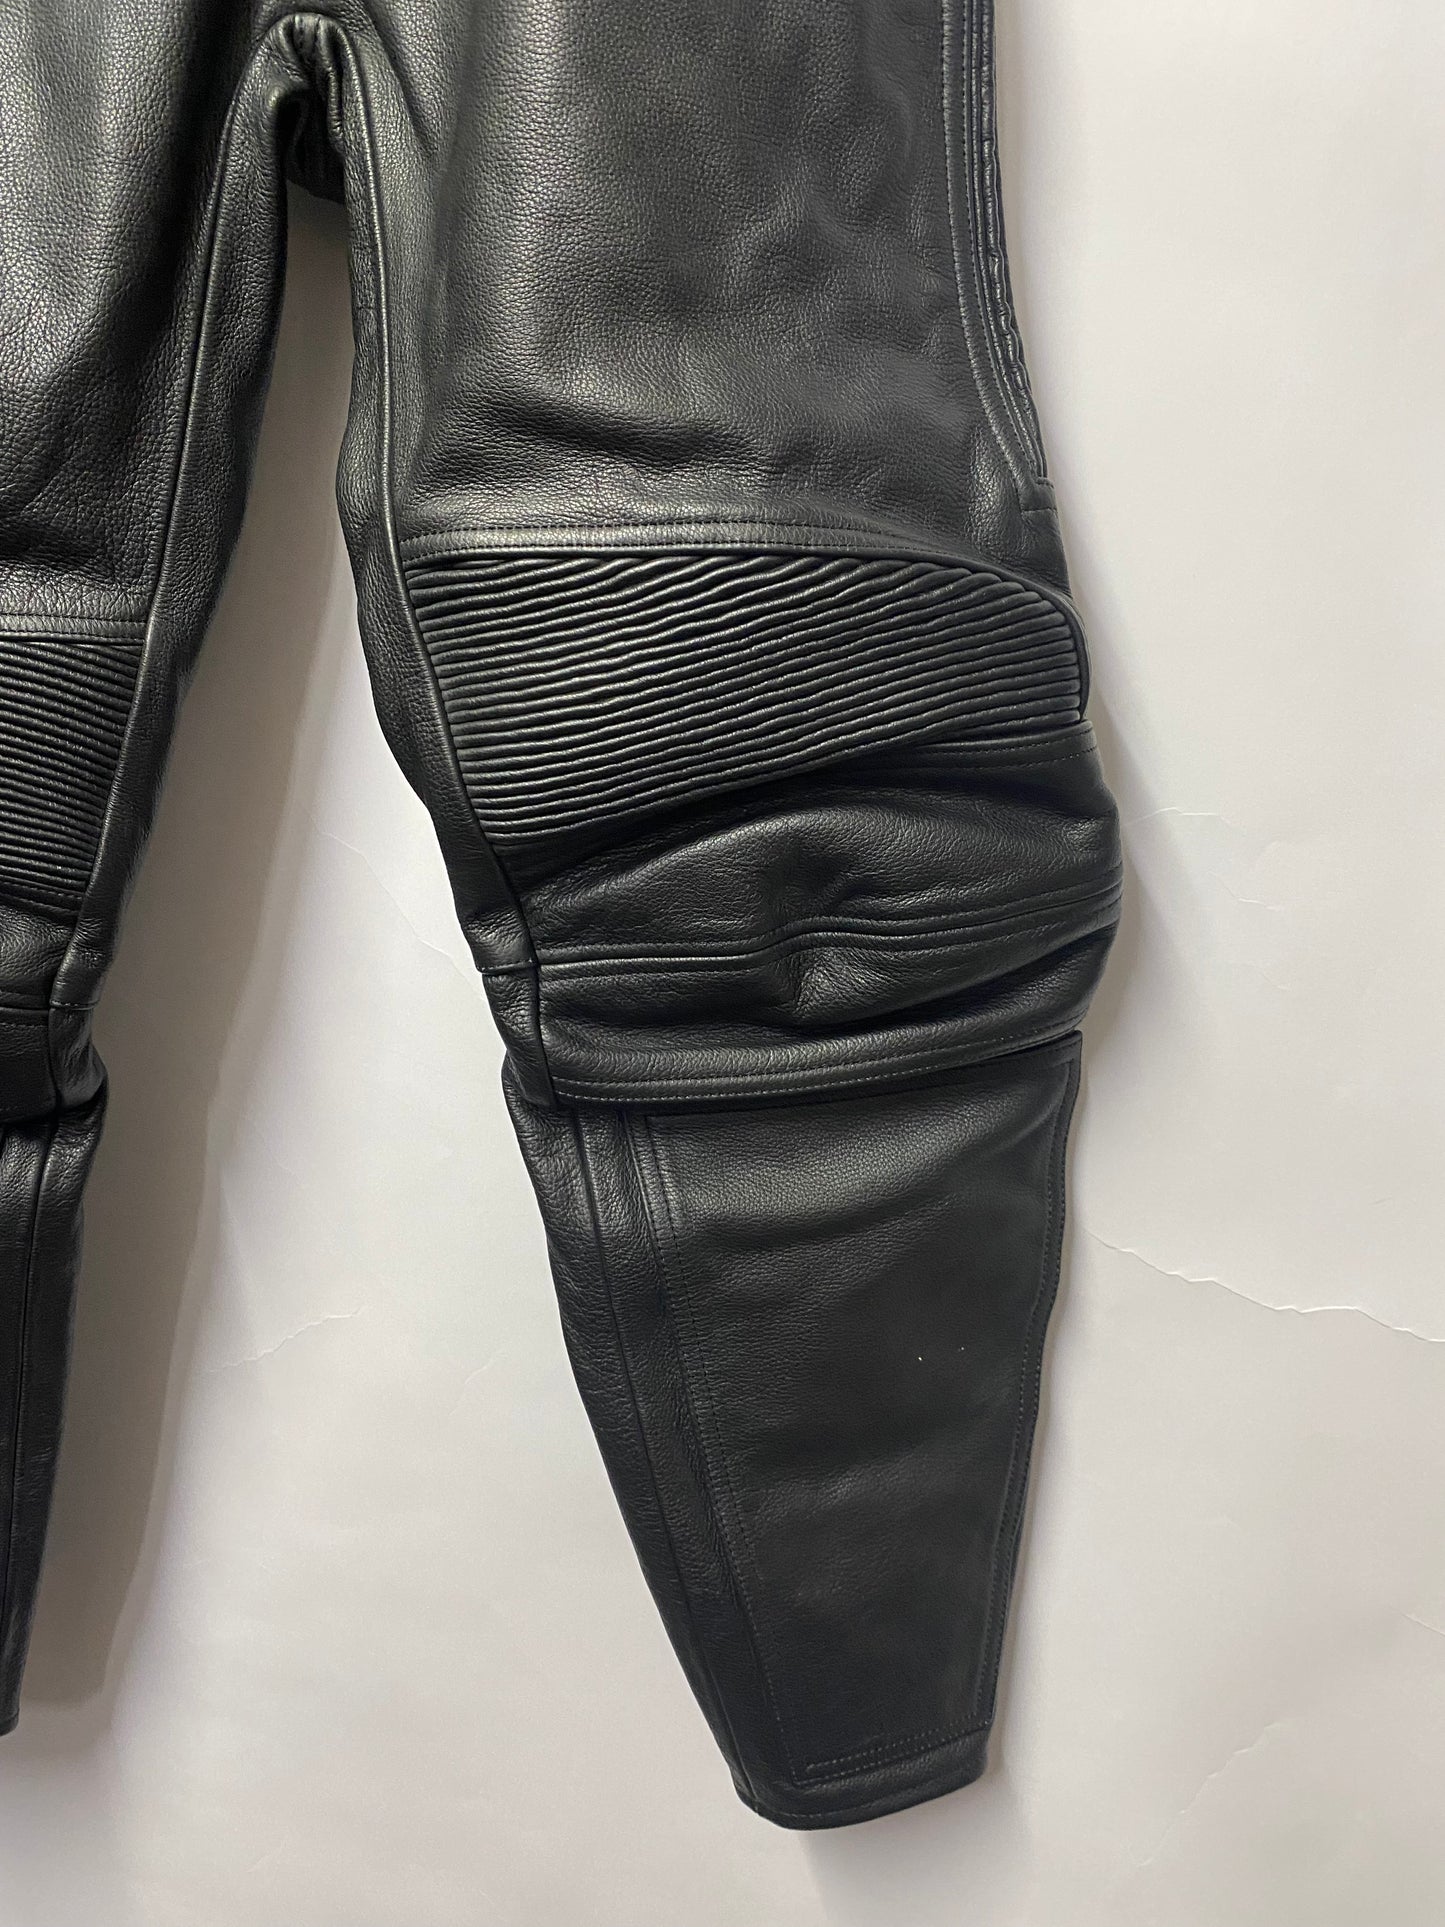 Rider Black Leather Motorbike Trousers 38